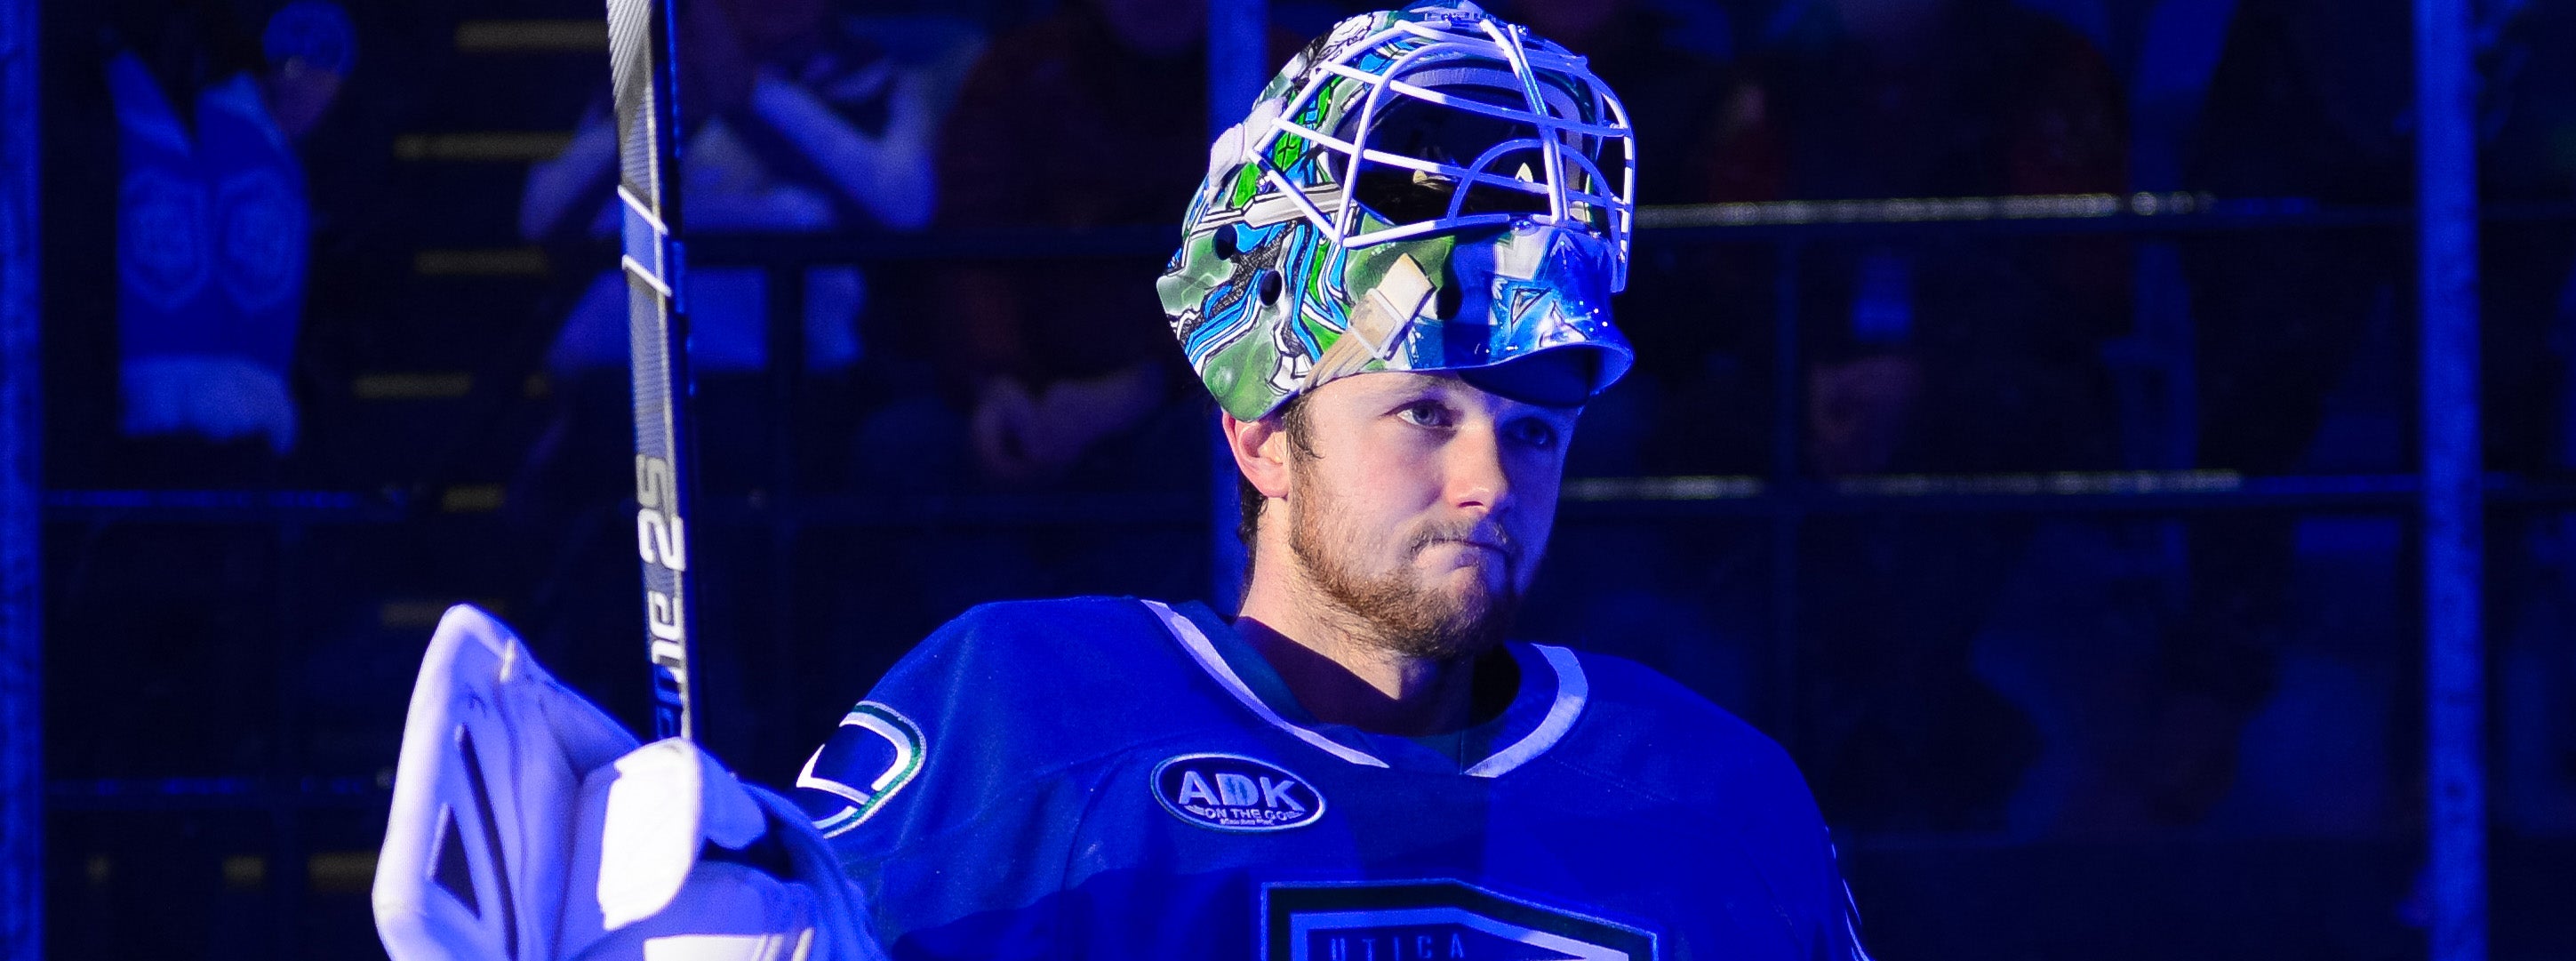 YEAR IN REVIEW: DEMKO'S FAREWELL TOUR